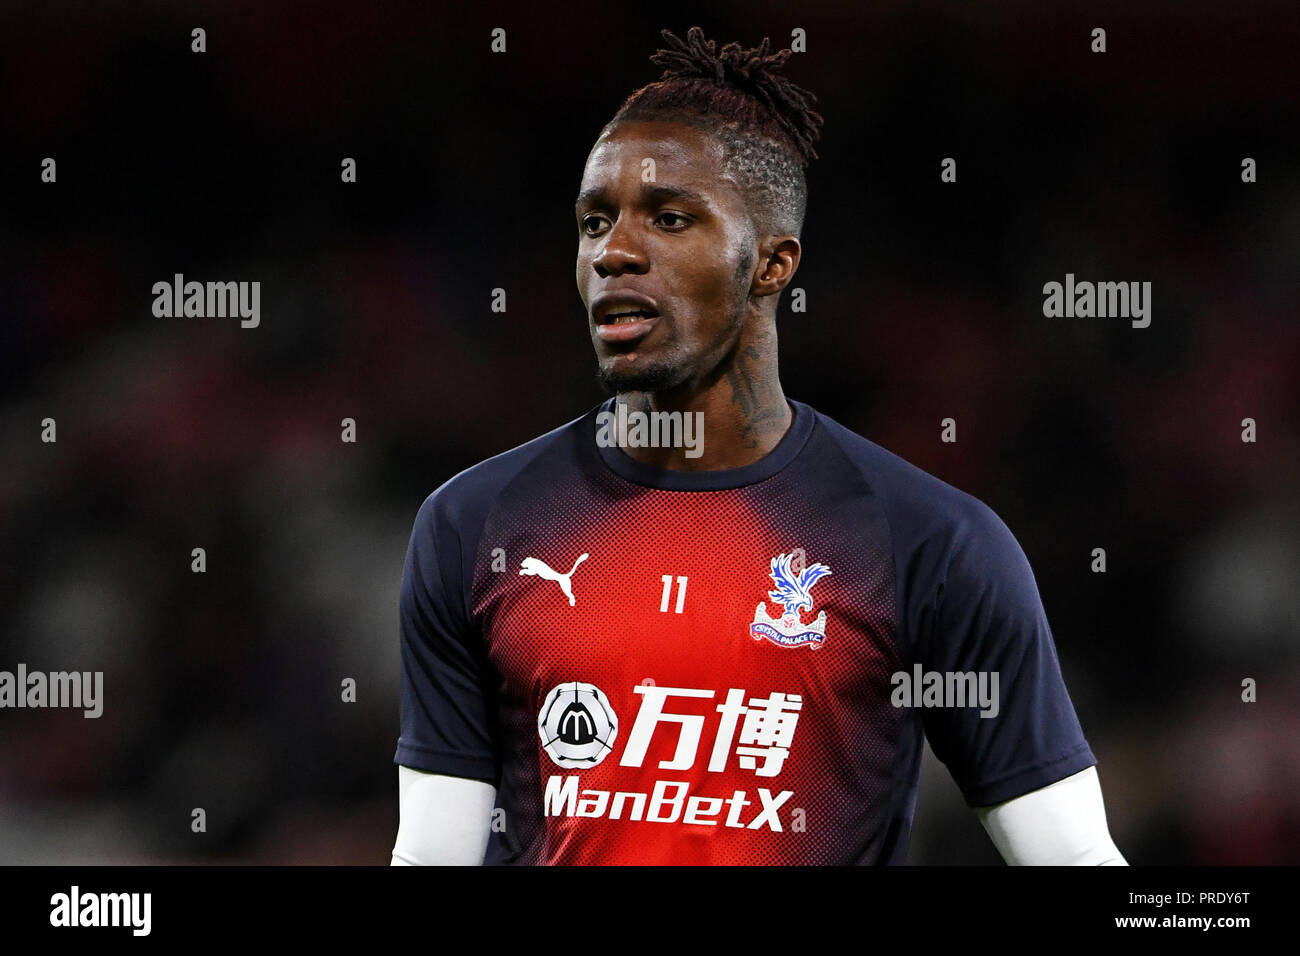 Bournemouth, UK. 1st Oct 2018. Wilfried Zaha of Crystal Palace - AFC Bournemouth v Crystal Palace, Premier League, Vitality Stadium, Bournemouth - 1st October 2018  STRICTLY EDITORIAL USE ONLY - DataCo rules apply - No use with unauthorised audio, video, data, fixture lists, club/league logos or 'live' services. Online in-match use limited to 75 images, no video emulation. No use in betting, games or single club/league/player publications. Credit: Richard Calver/Alamy Live News Stock Photo